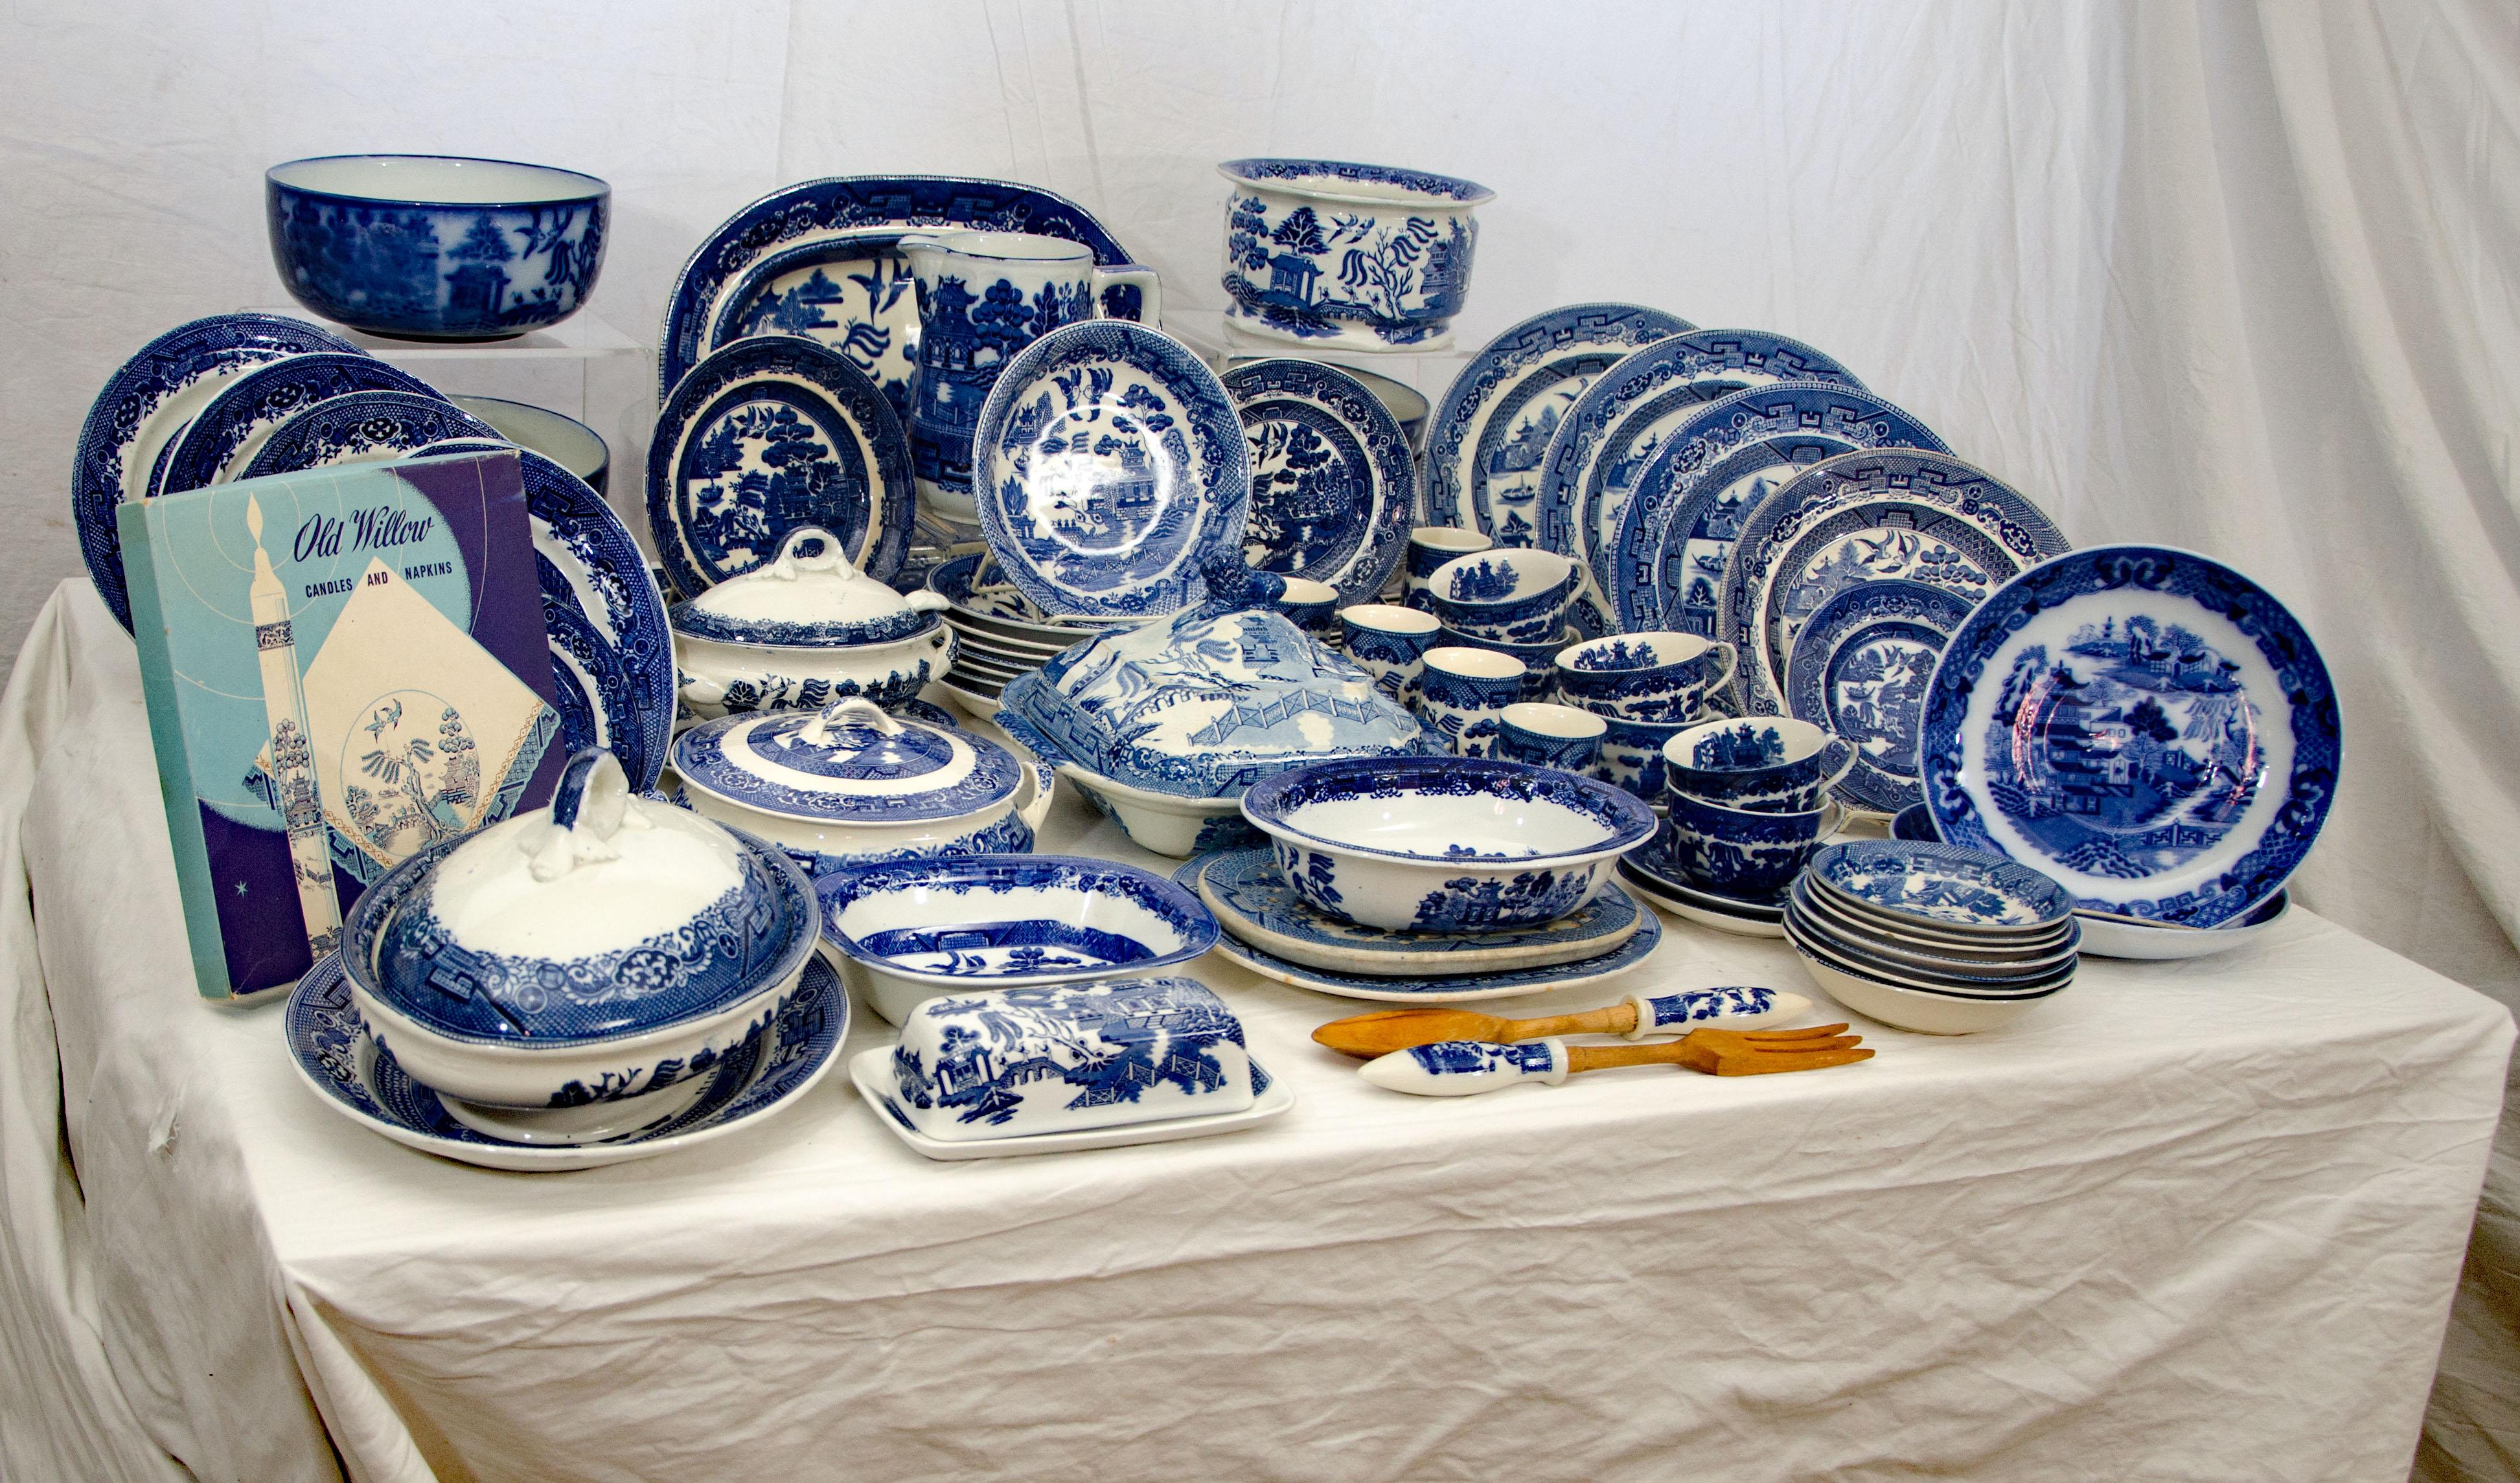 A huge collection of vintage blue willow dinnerware with both English and Japanese markings, as well as some unmarked pieces. Also included are 20 items (mostly plates) not photographed. There are a few minor chips on a few items, mostly under rims.